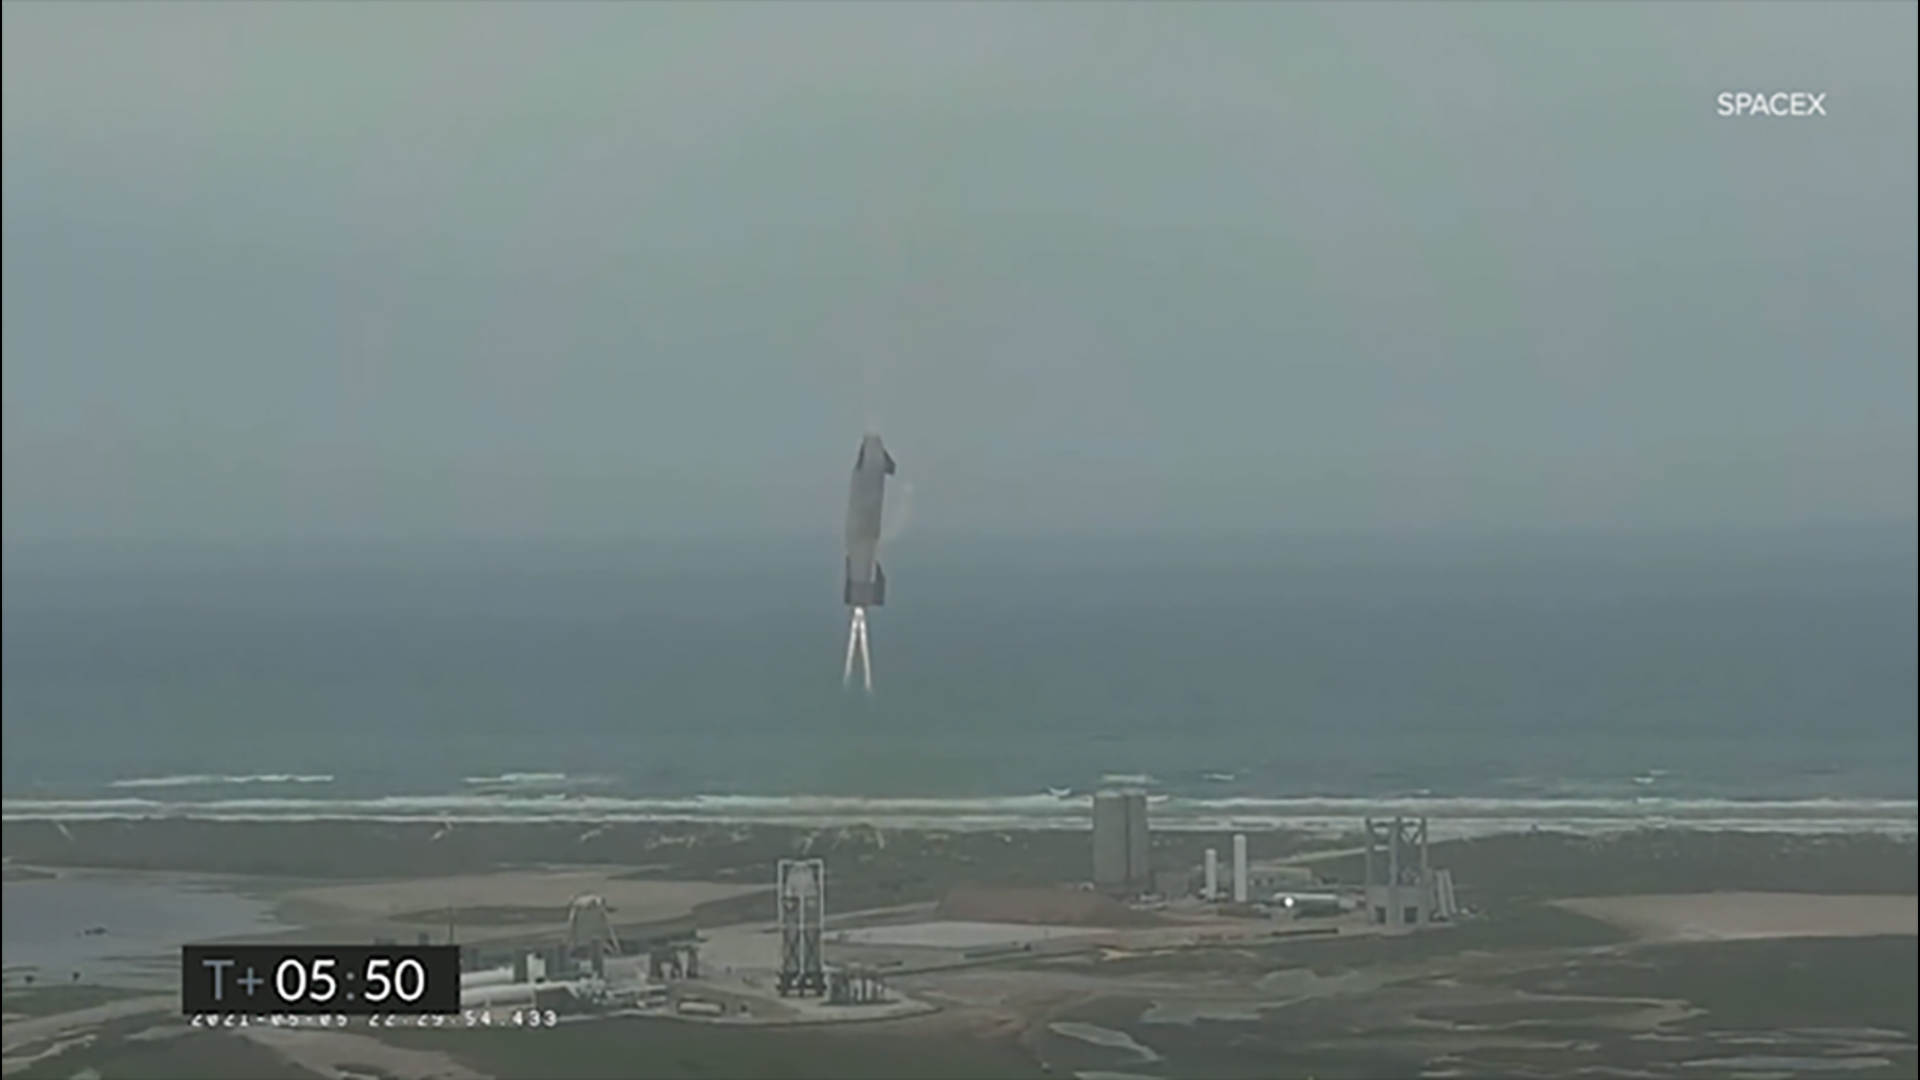 SpaceX's latest Starship prototype, SN15, finally stuck the landing! Wednesday marked the first time a SpaceX Starship flight test did not end in a fiery explosion.